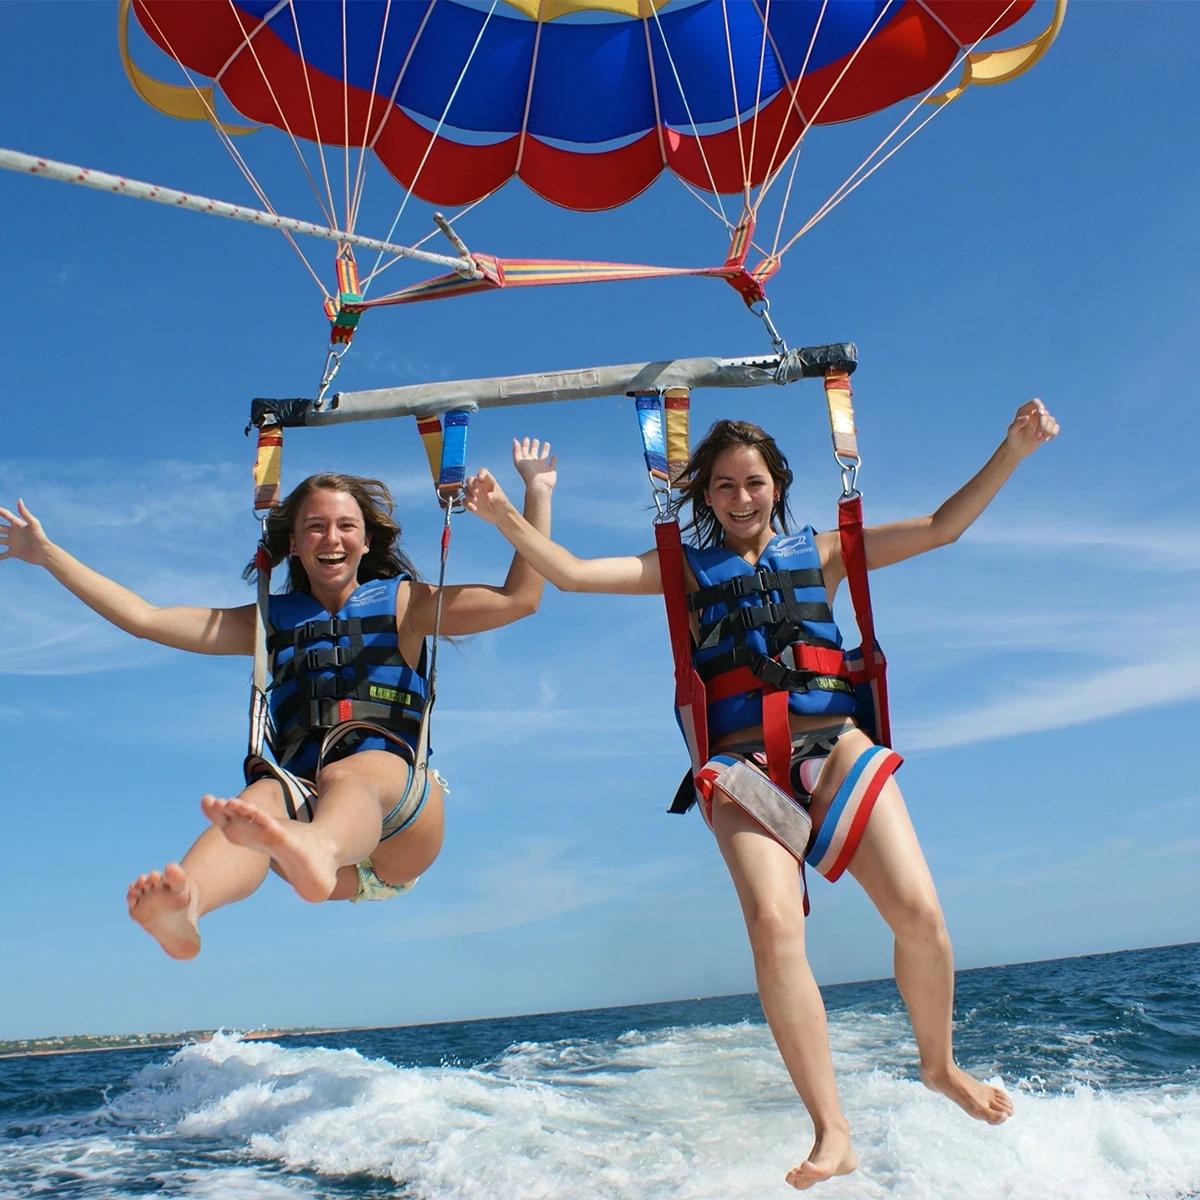 Parasailing in Yolo Tour